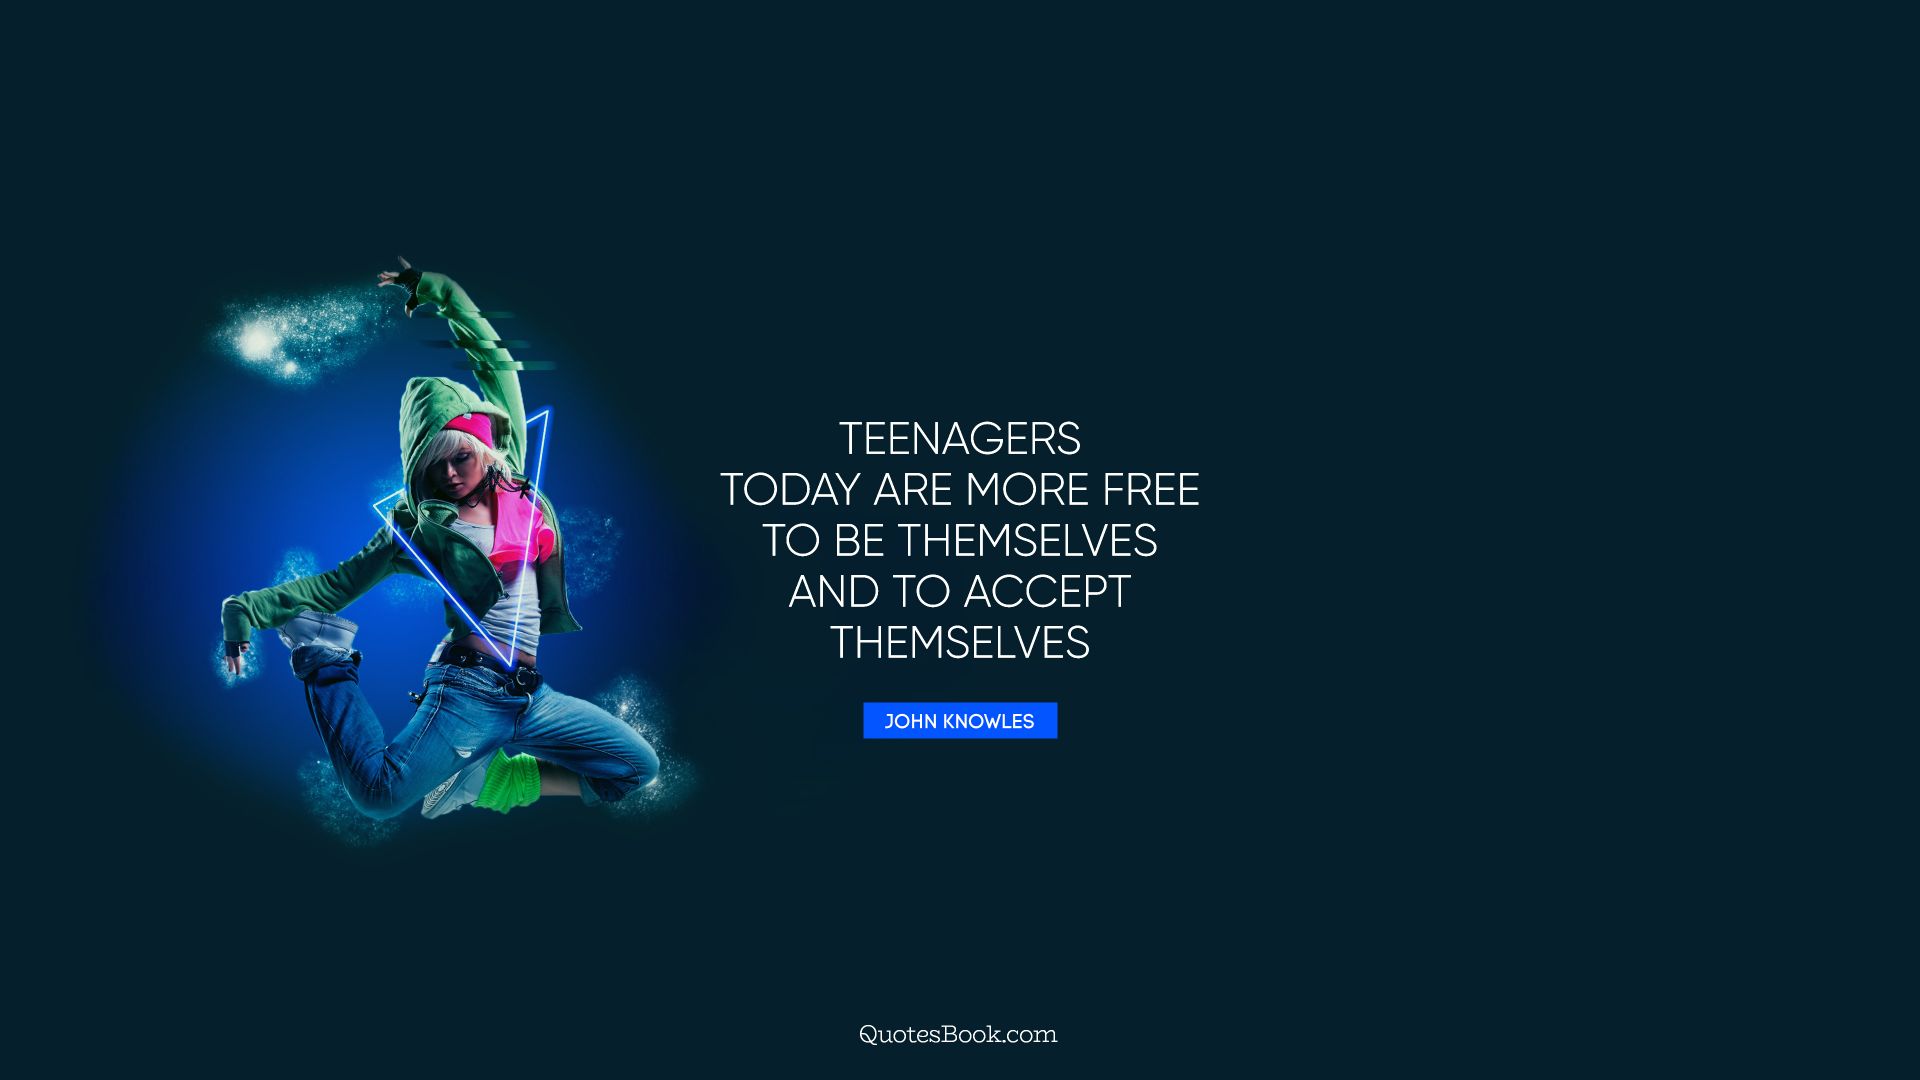 Teenagers today are more free to be themselves and to accept themselves. - Quote by John Knowles